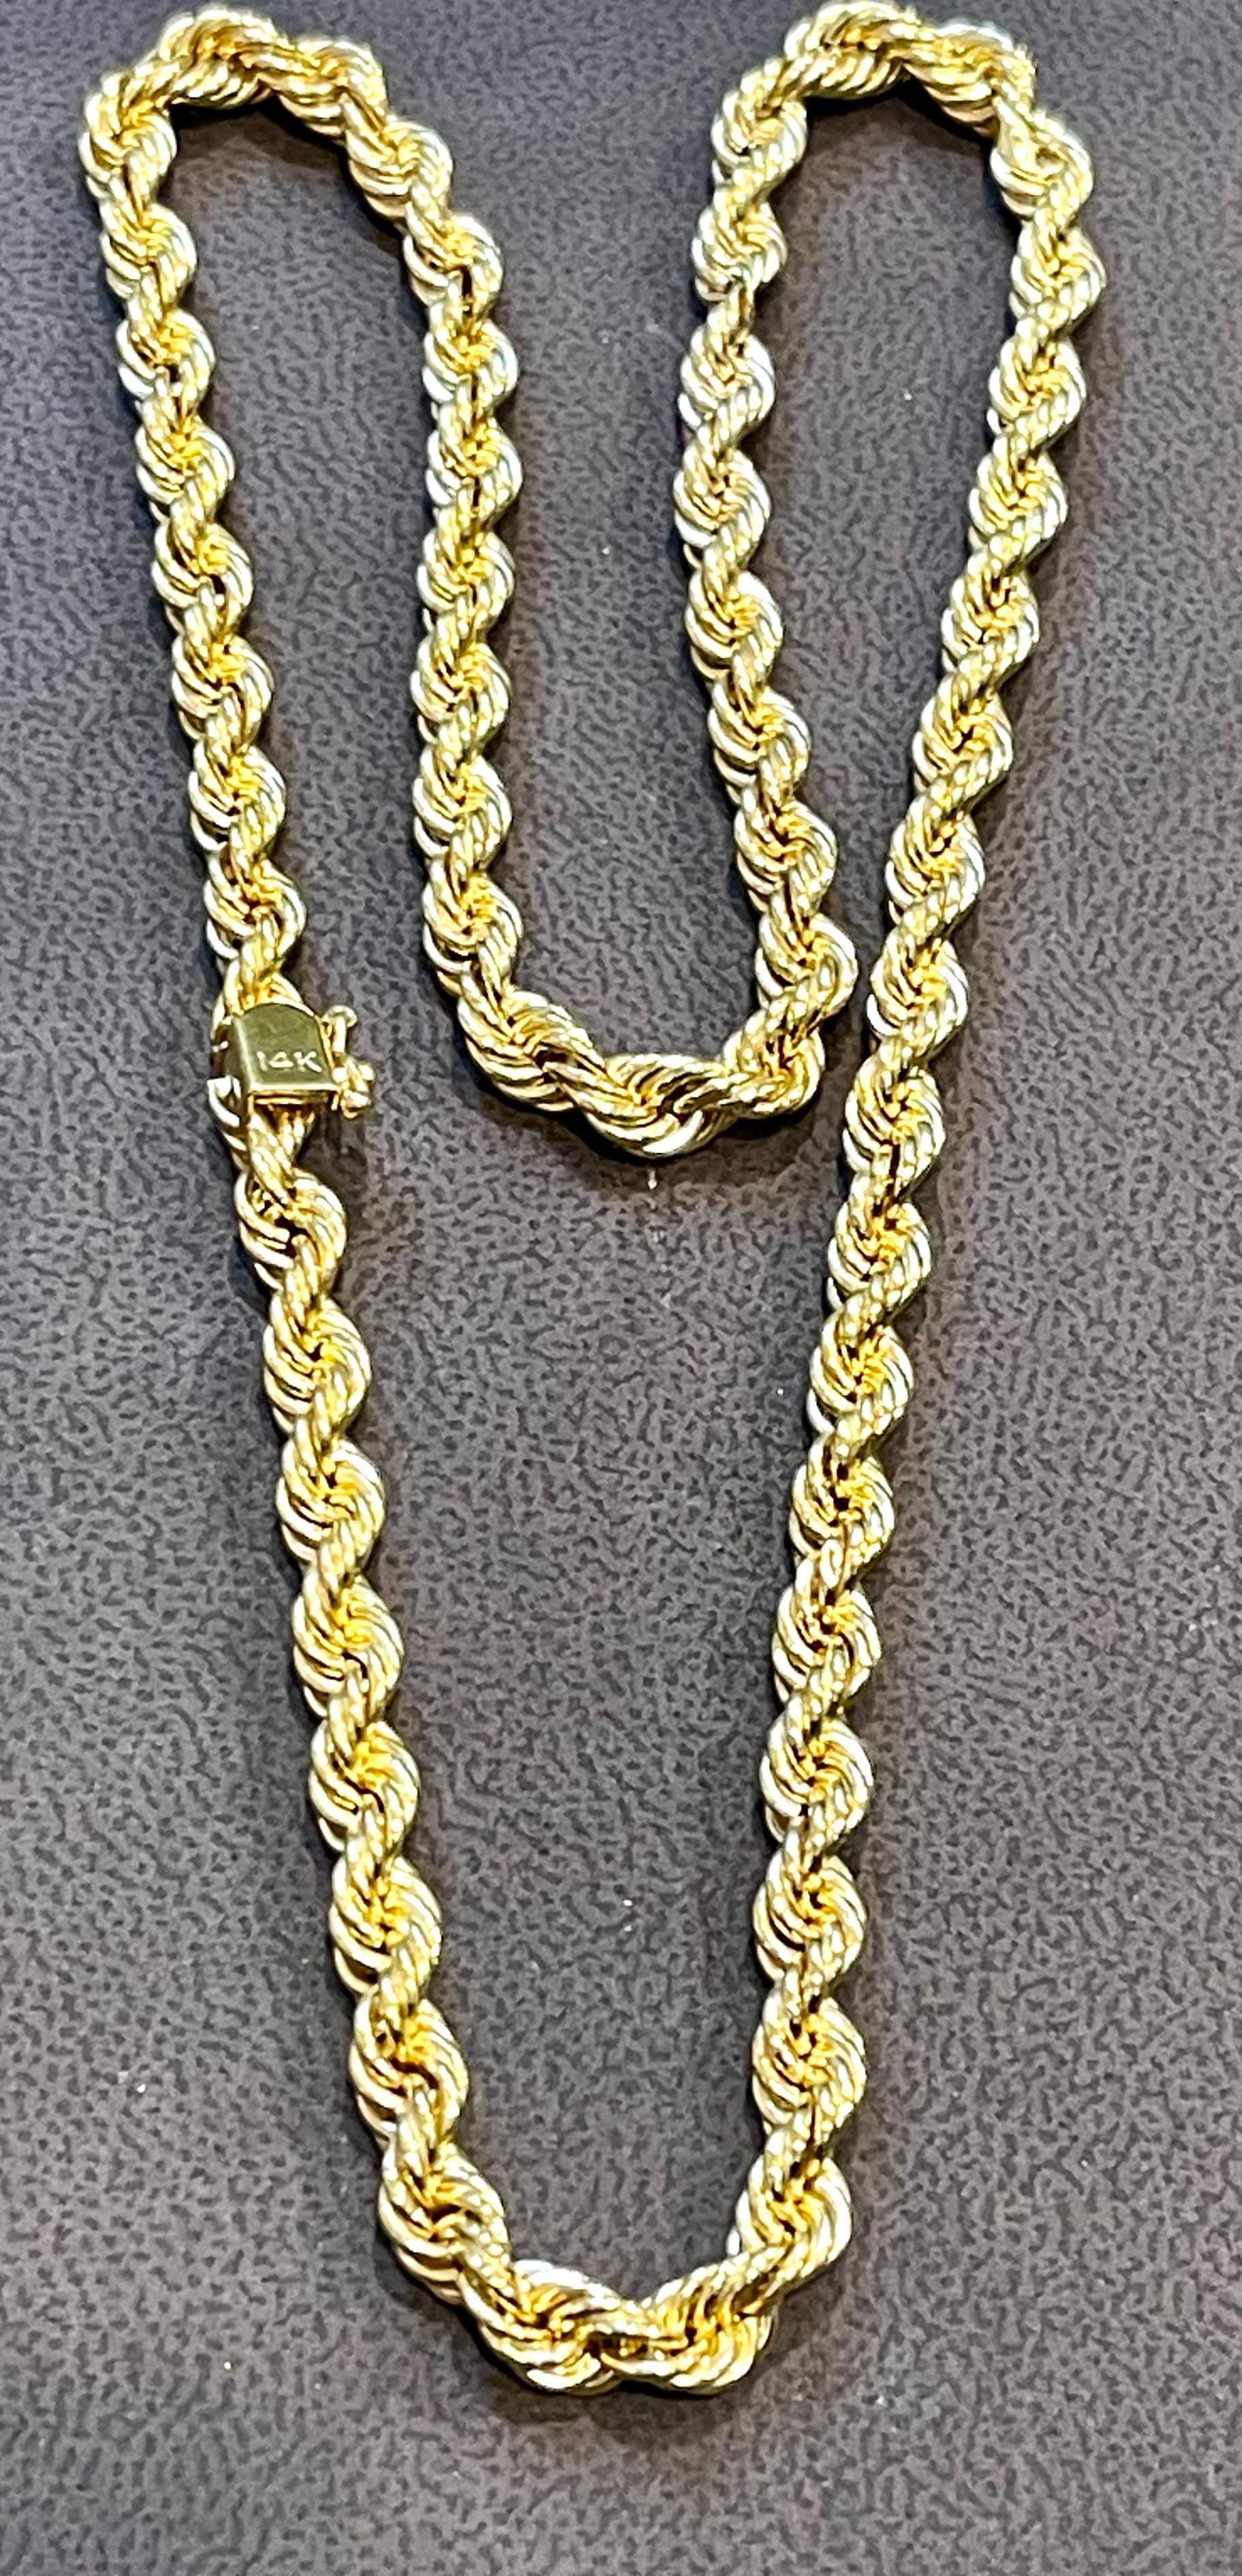 Vintage 14 Karat Yellow Gold 21 Gm, Rope Chain Necklace 4